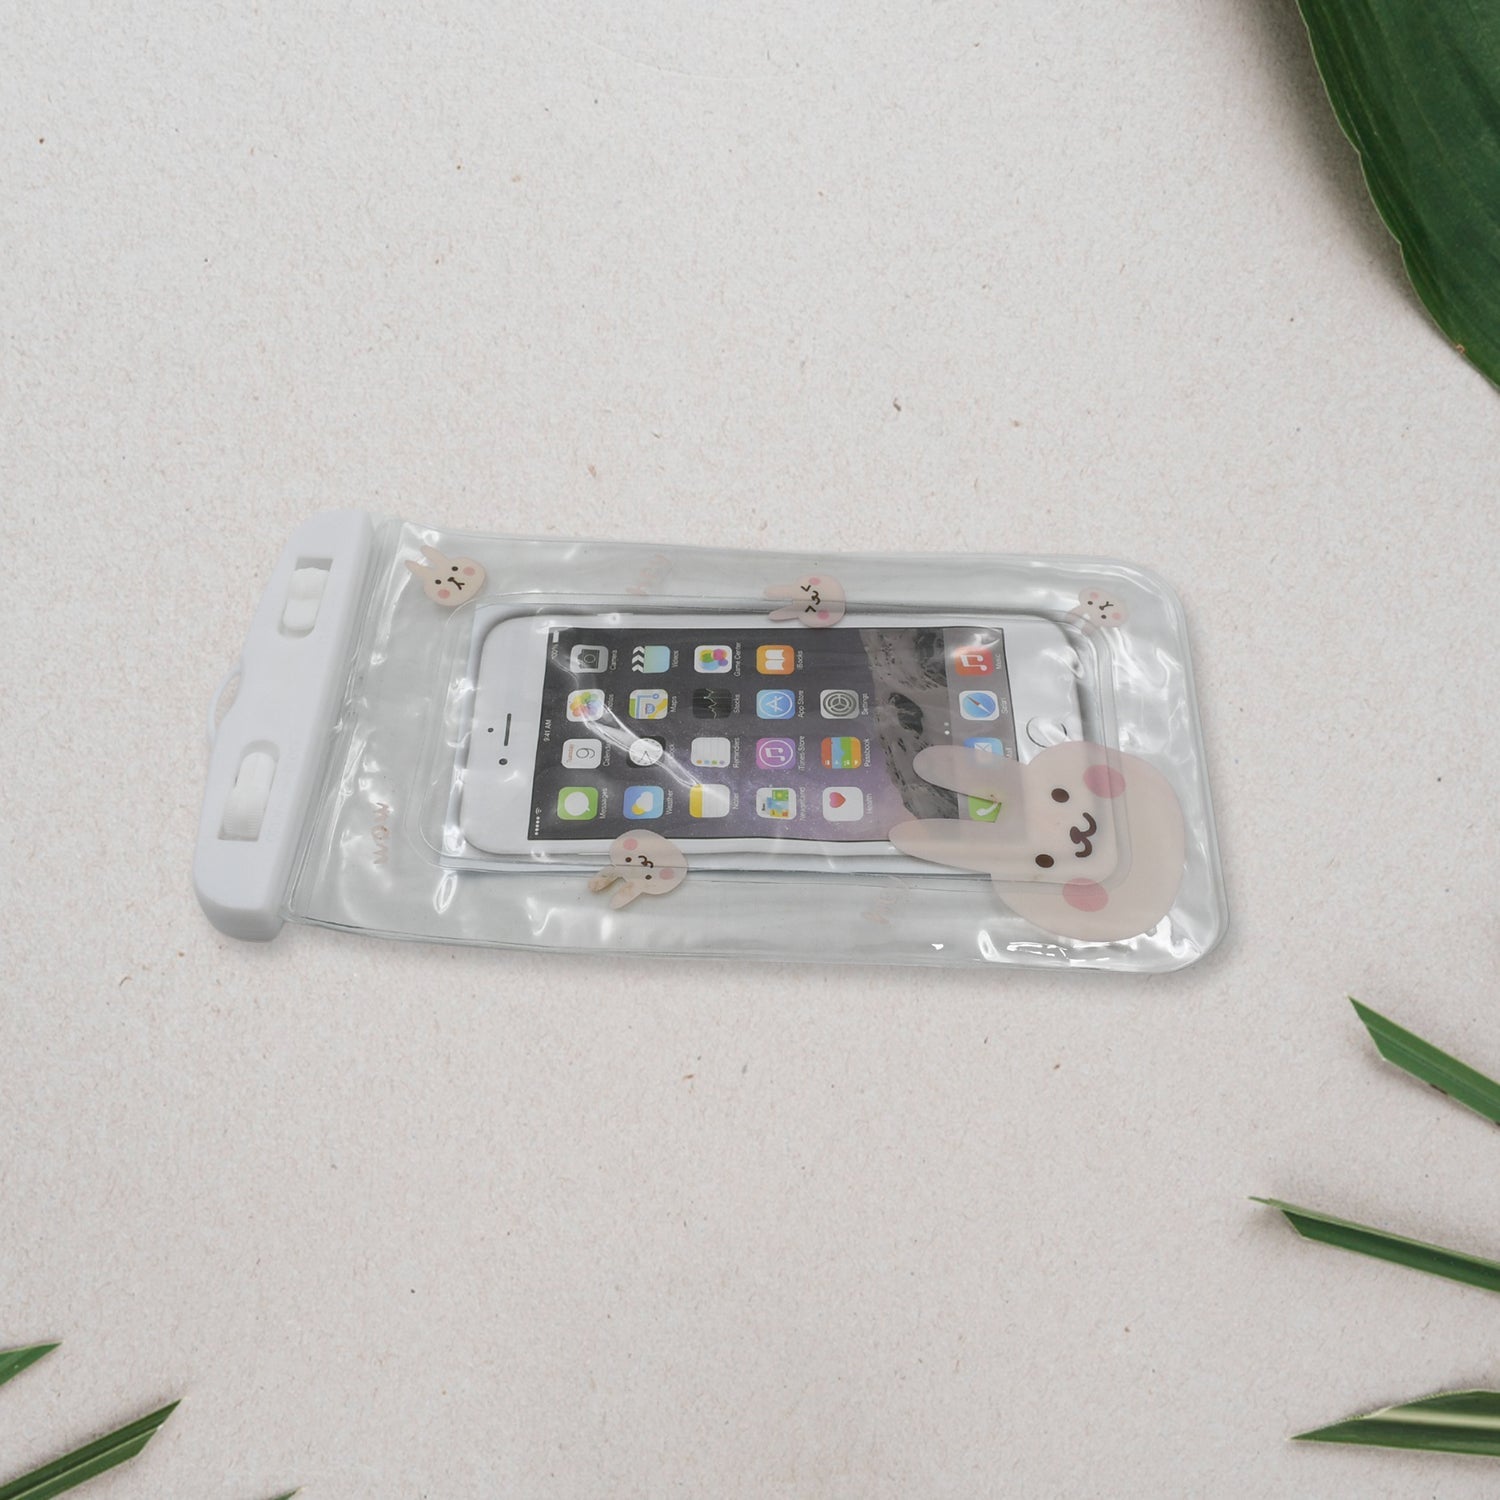 6922 Mobile Cover Pouch Transparent Waterproof Sealed Plastic Smartphone Protective Pouch Cover/Bag for All Mobile Phones